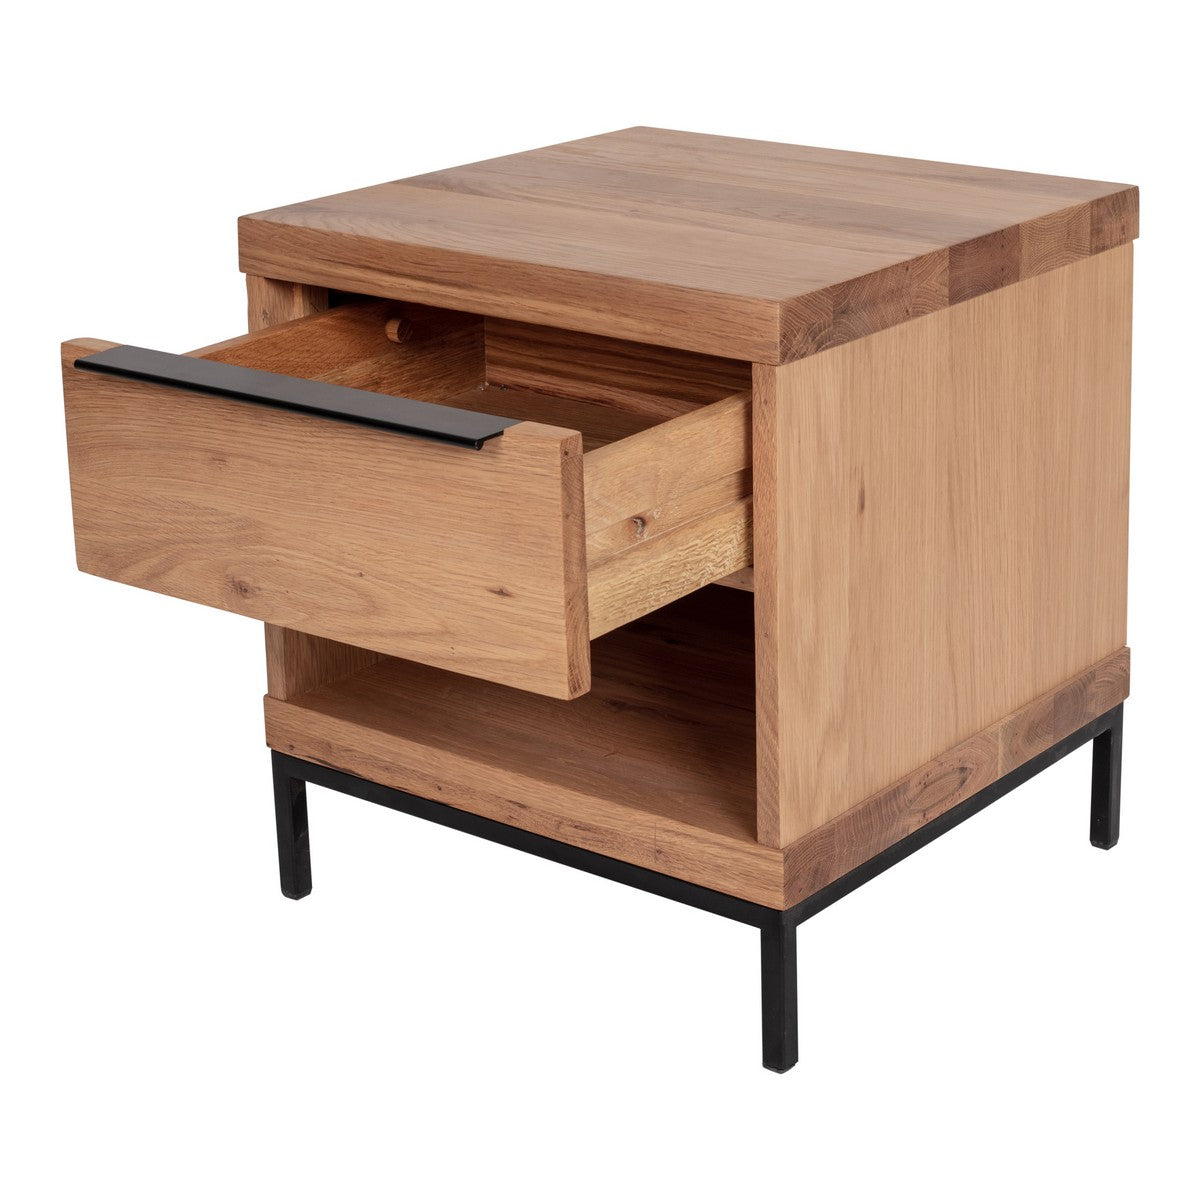 Moe's Home Collection Montego One Drawer Nightstand - YC-1013-24